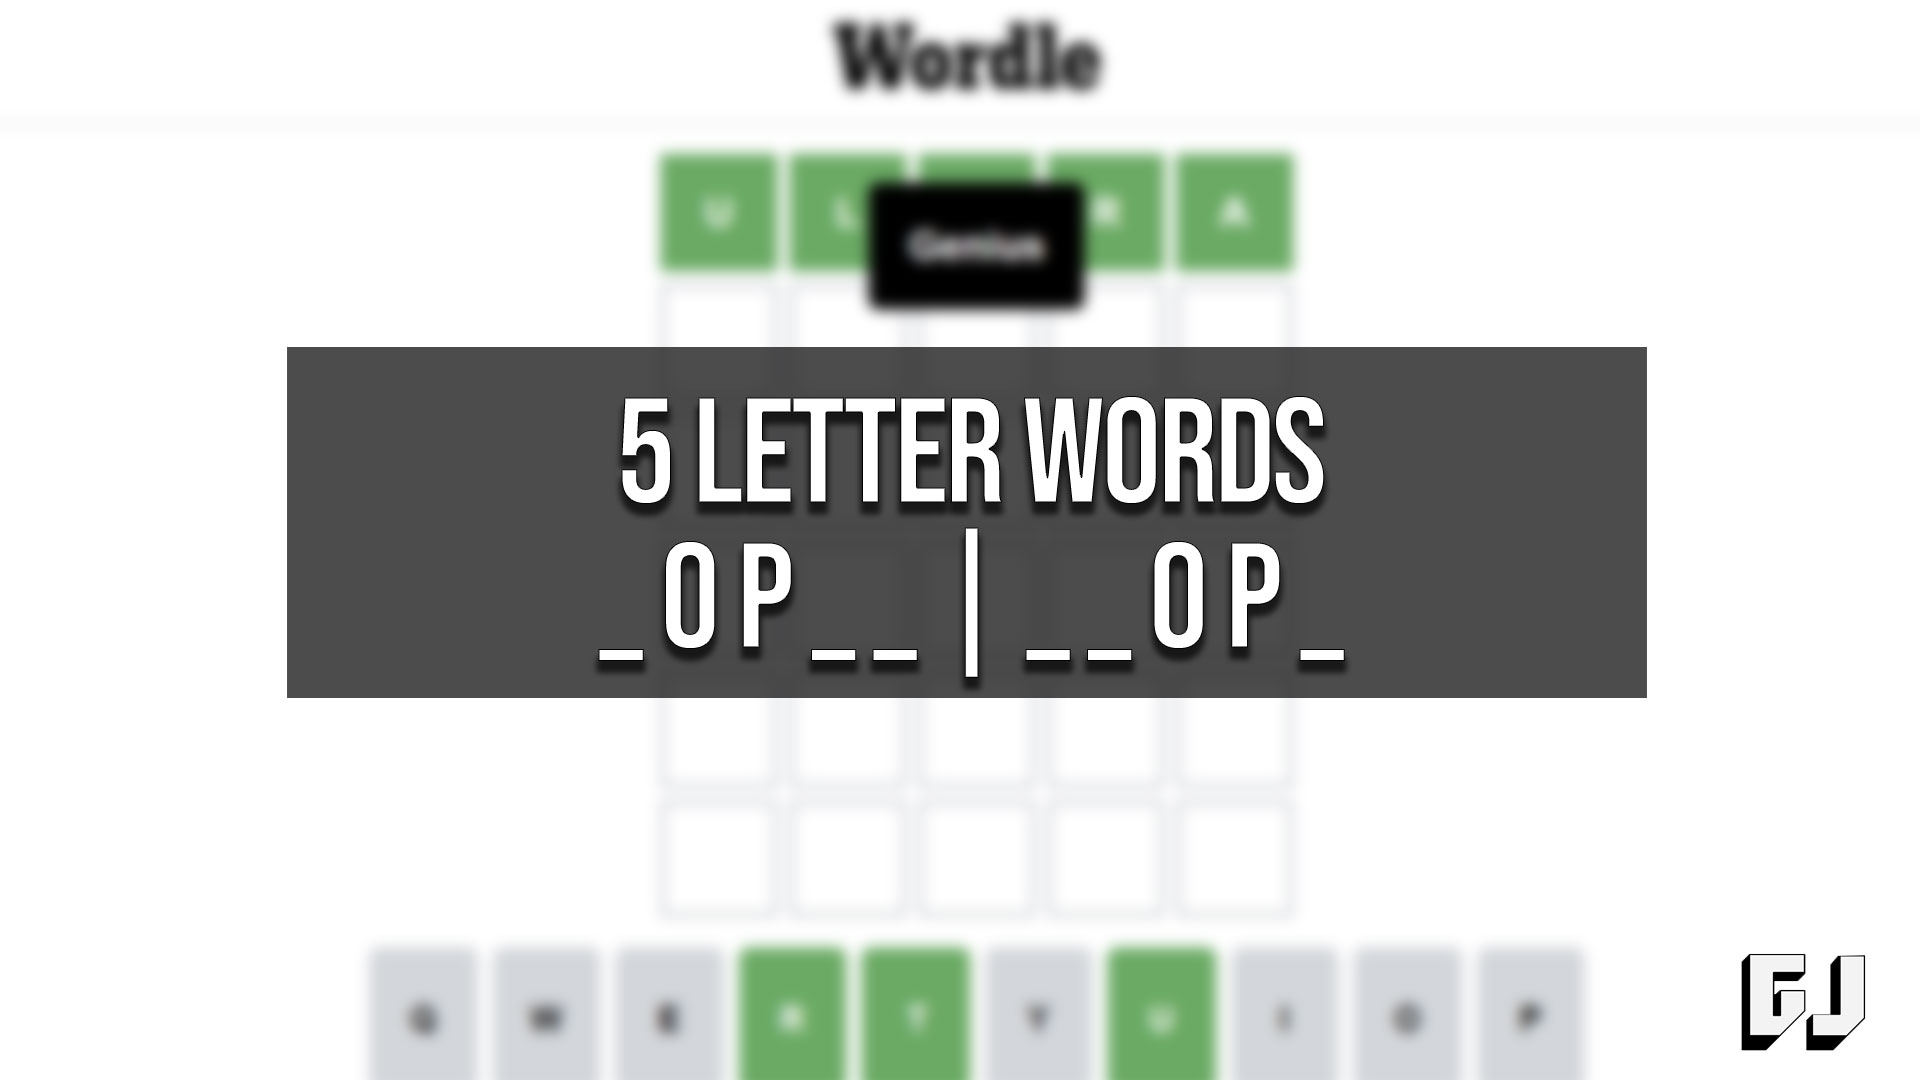 5 letter words starting with op